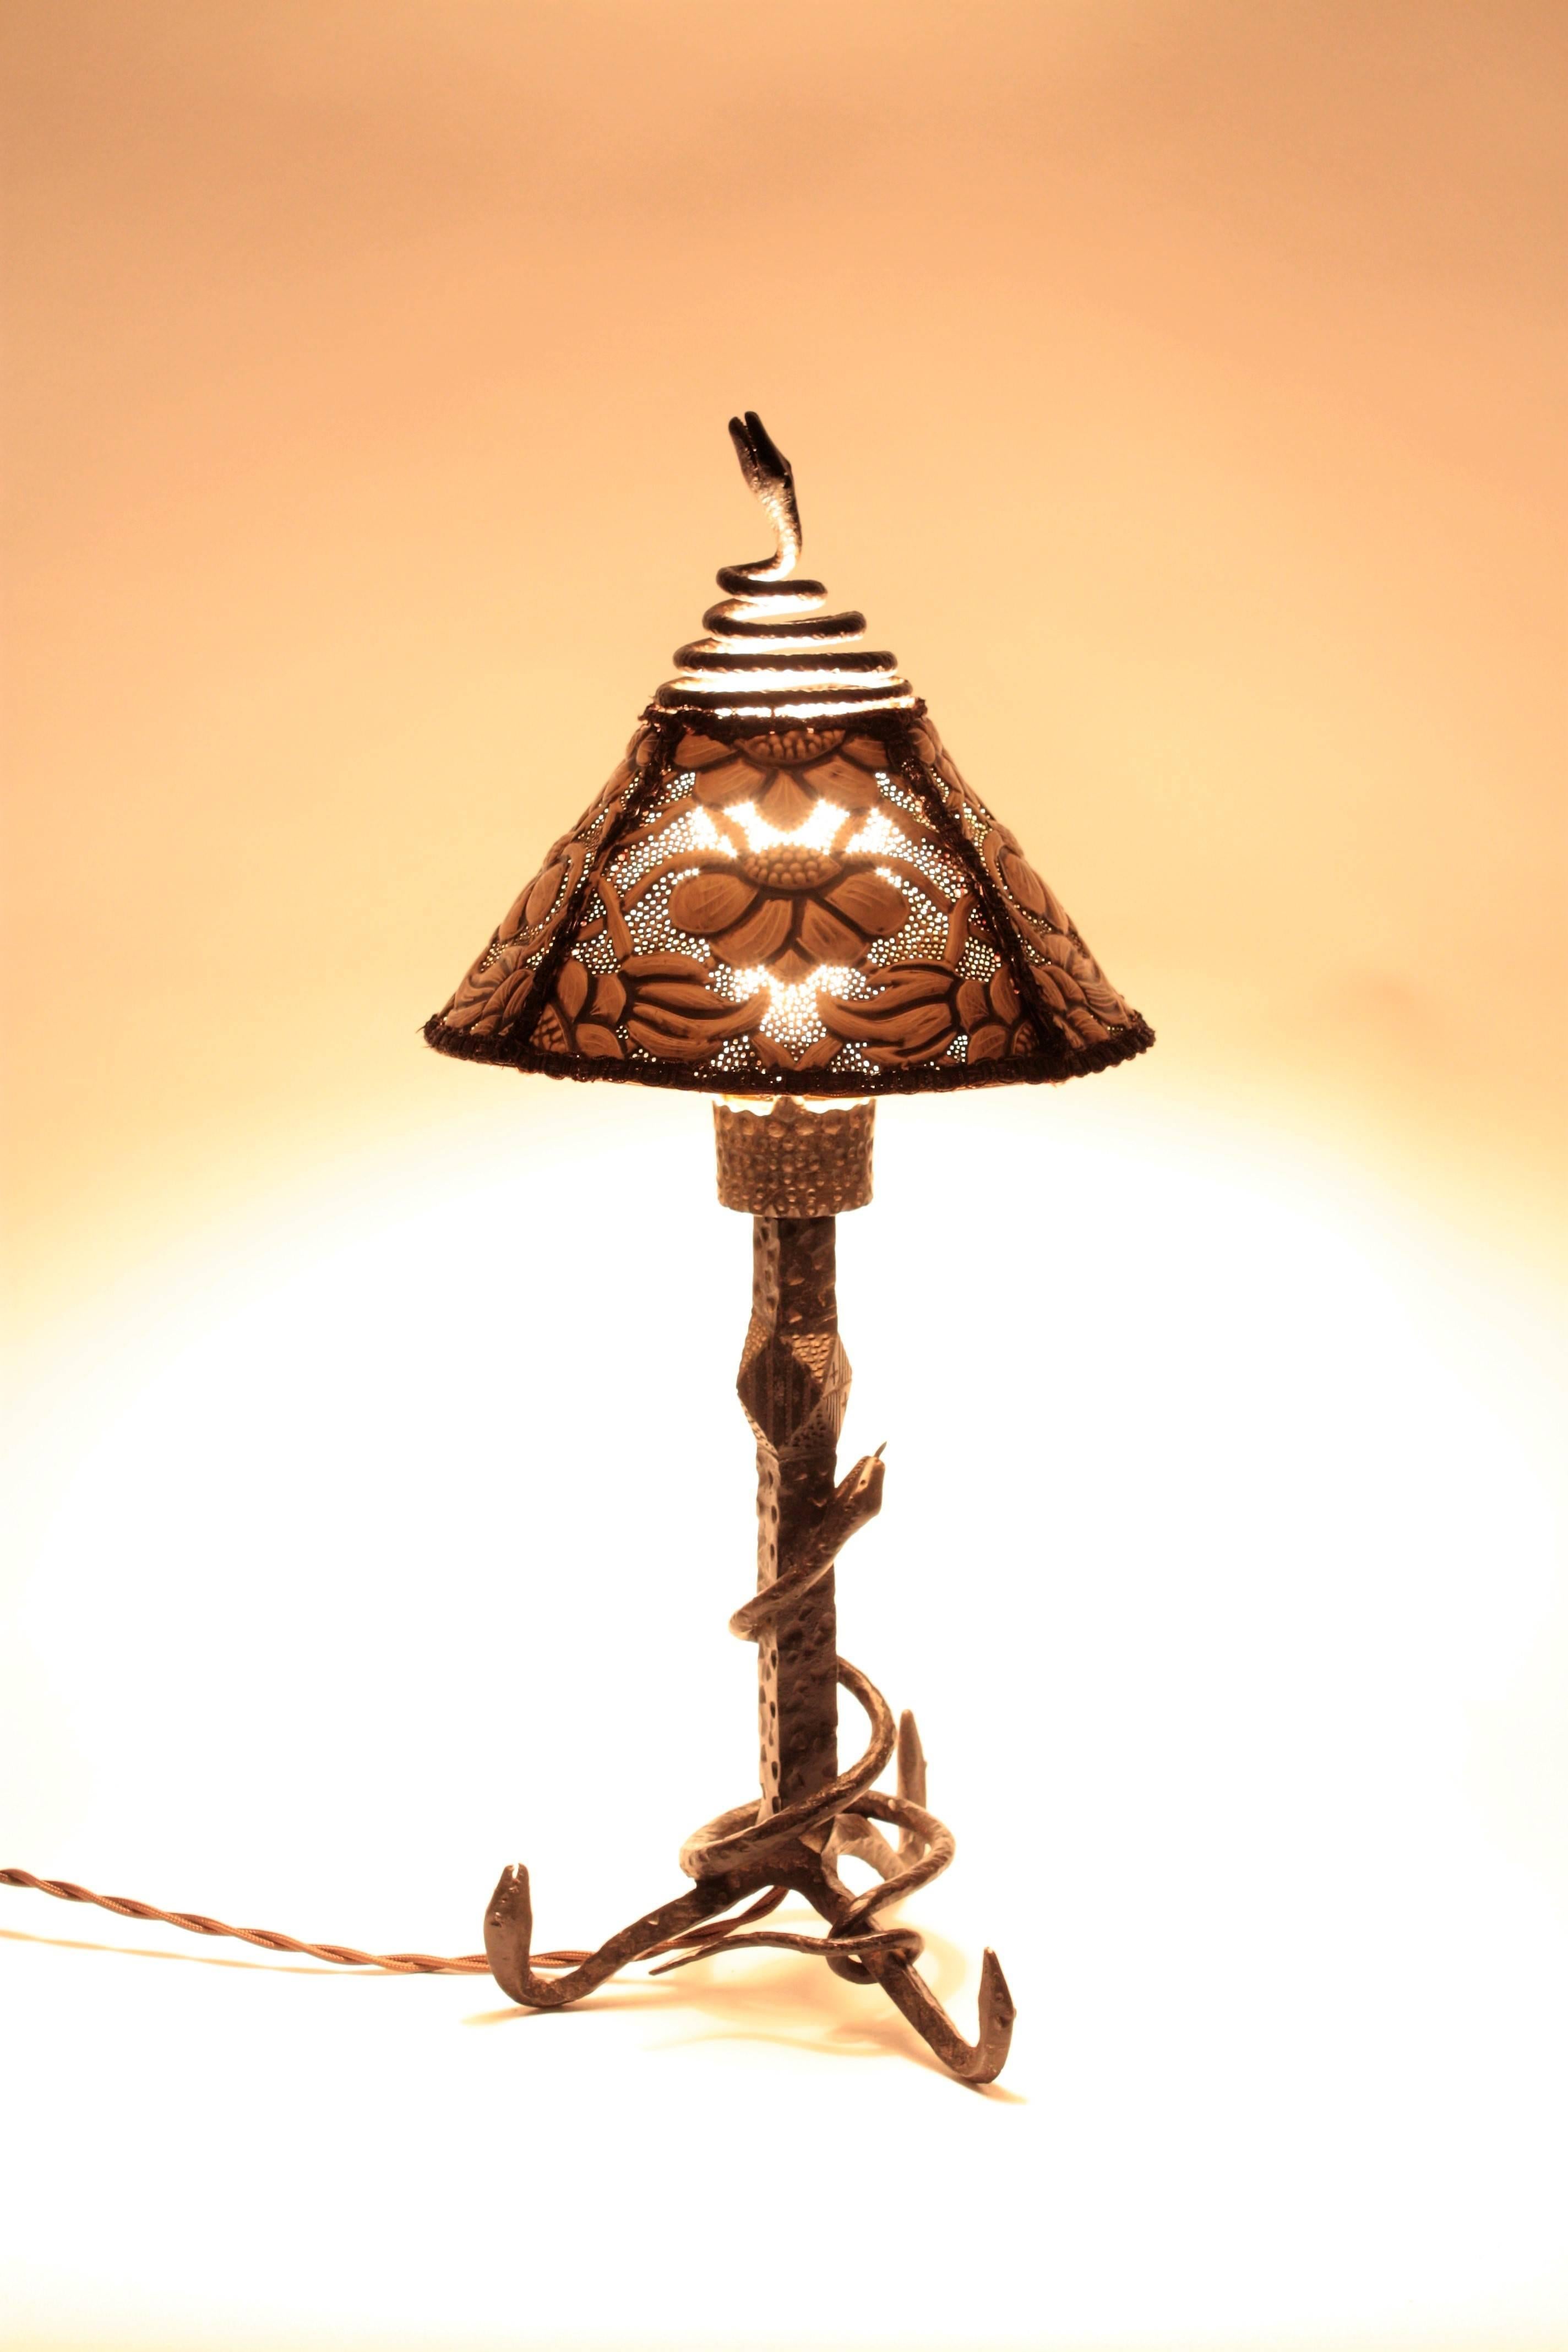 wrought iron table lamps